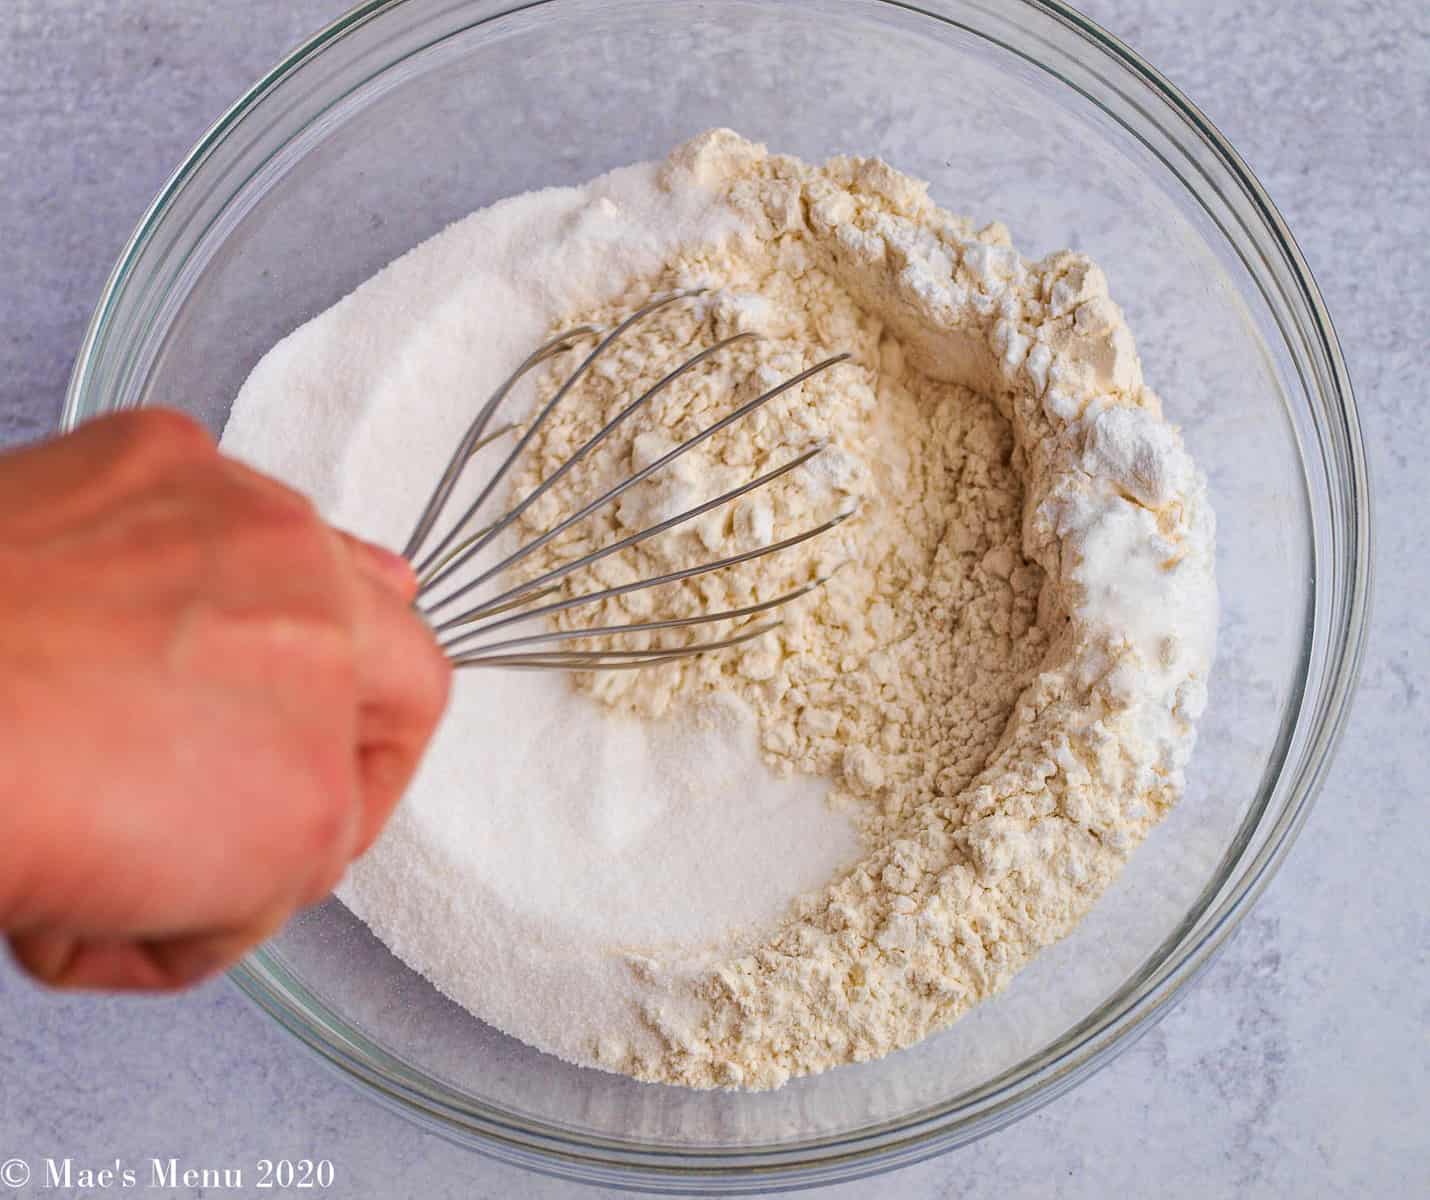 A whisk mixing together flour and sugar in a large bowl